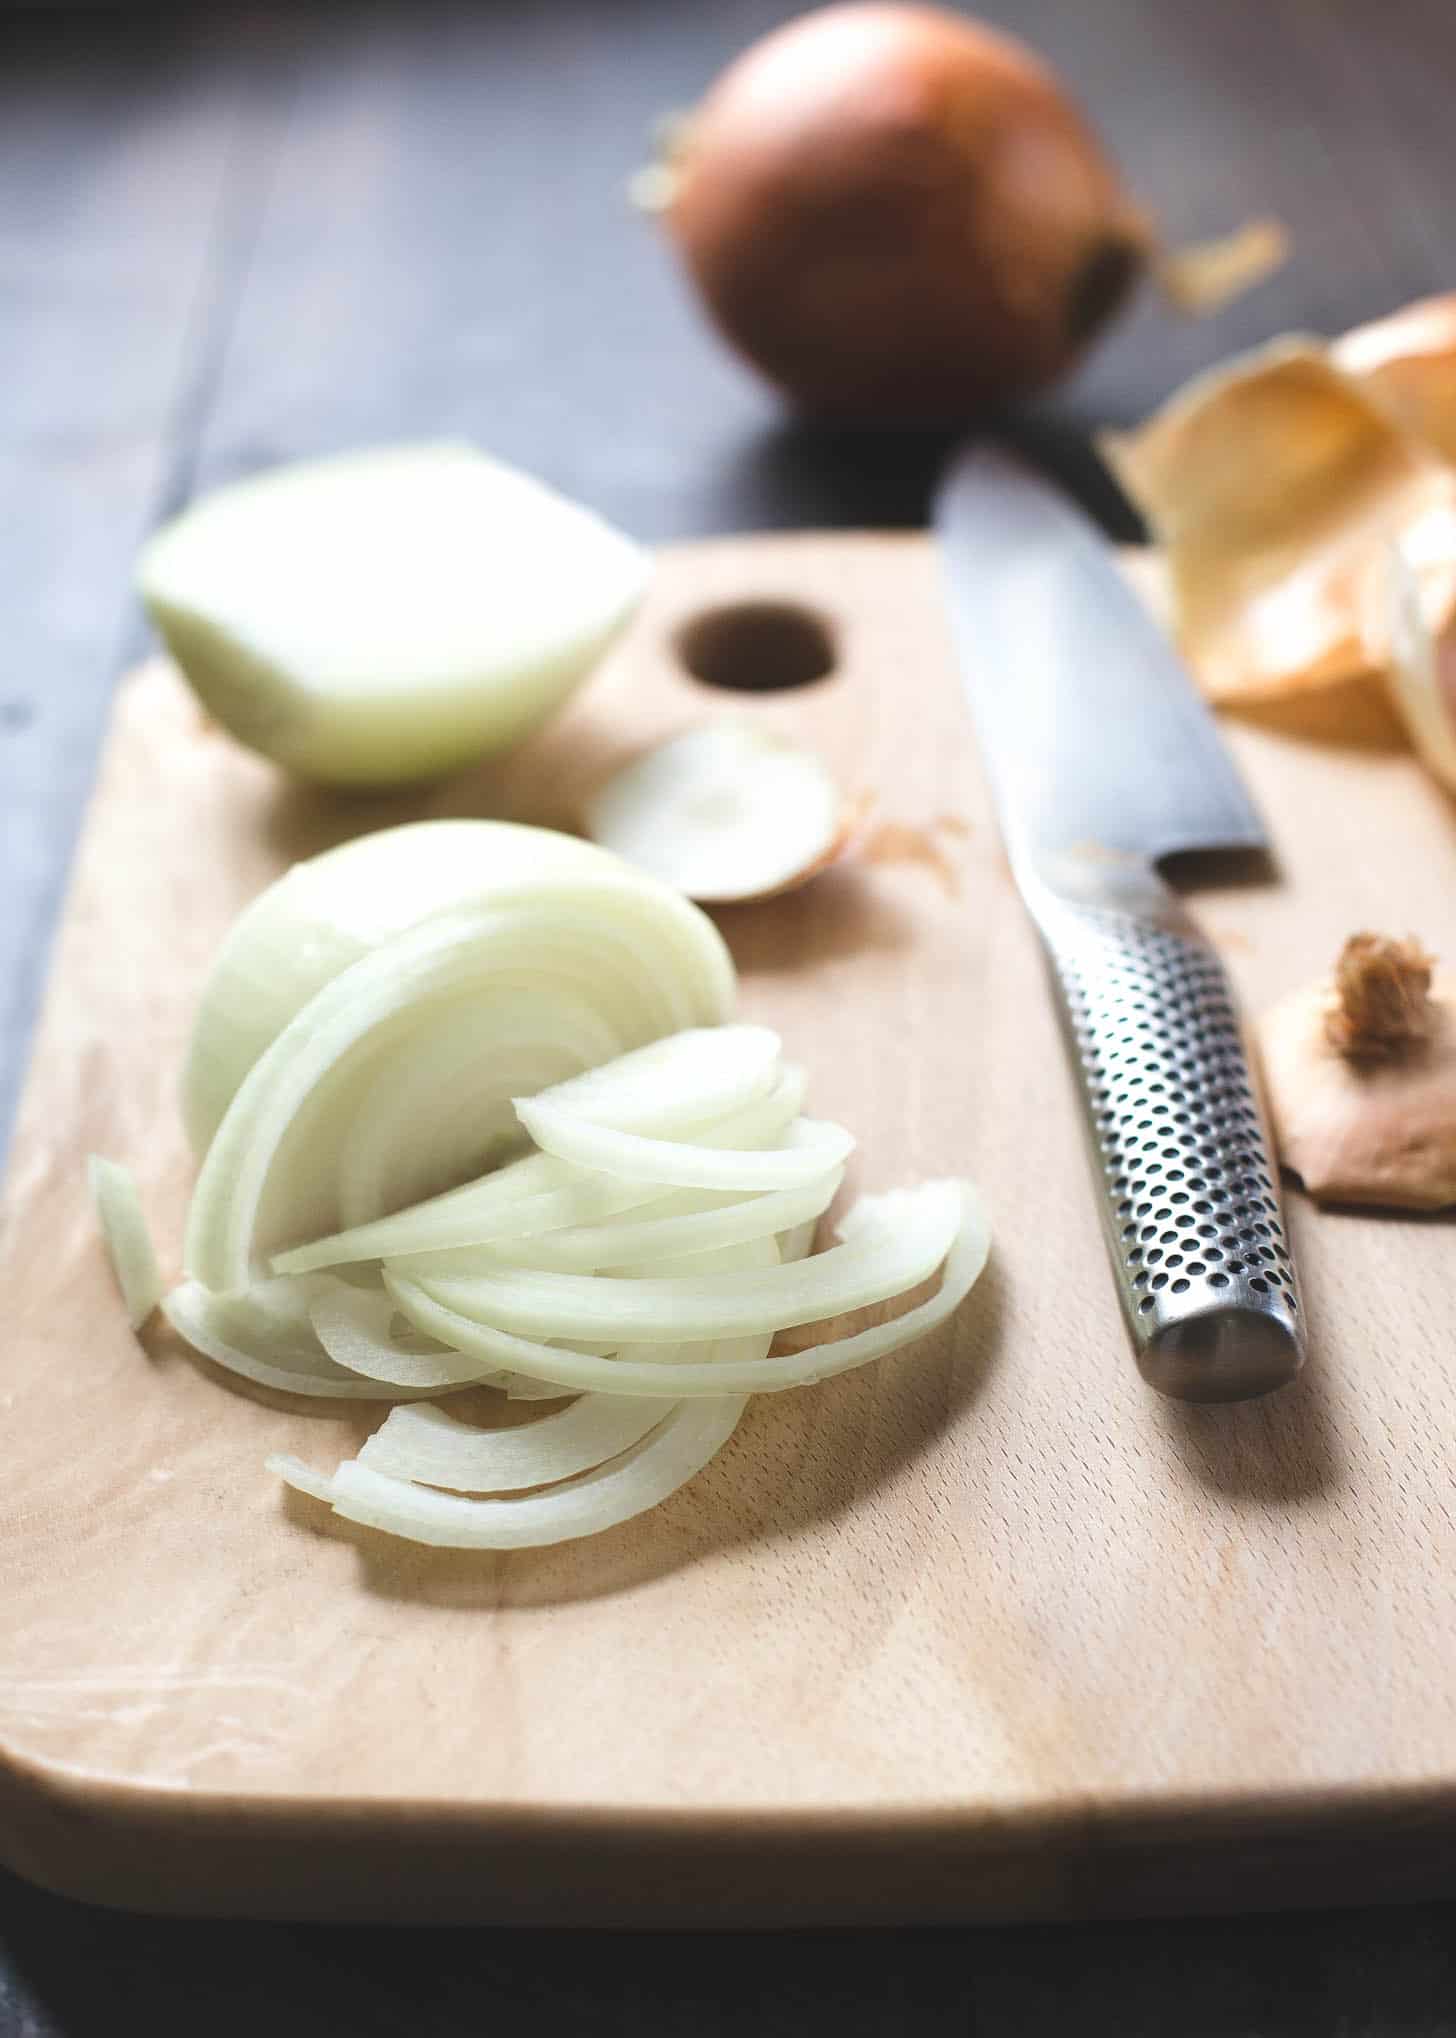 slicing onions on a wooden cutting board